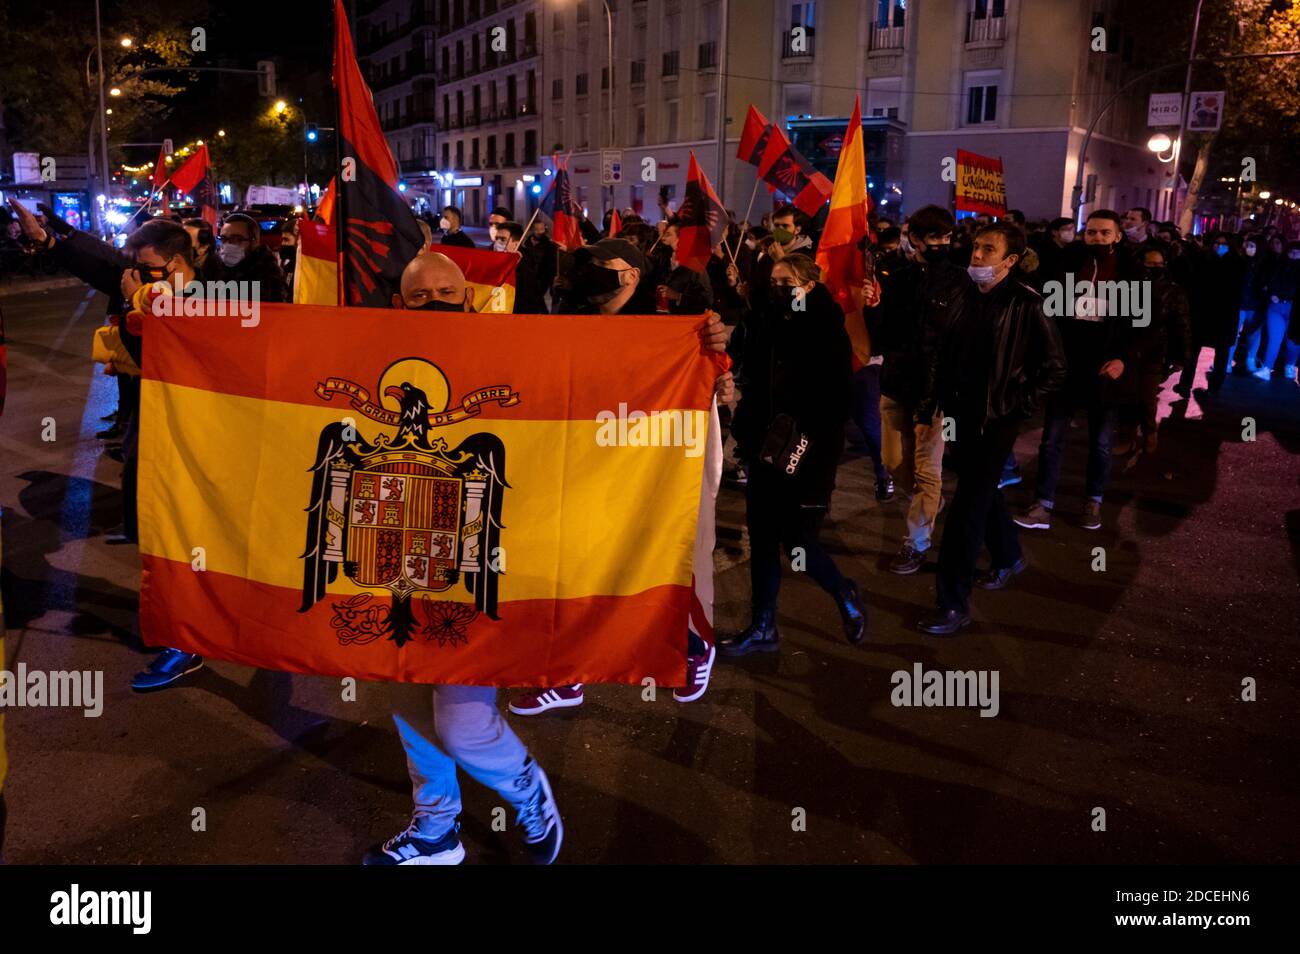 Madrid, Spain. 20th Nov, 2020. Far right wing supporter carrying a pre-constitutional Spanish flag during a rally to commemorate the death anniversary of Falange founder Jose Antonio Primo de Rivera. Credit: Marcos del Mazo/Alamy Live News Stock Photo